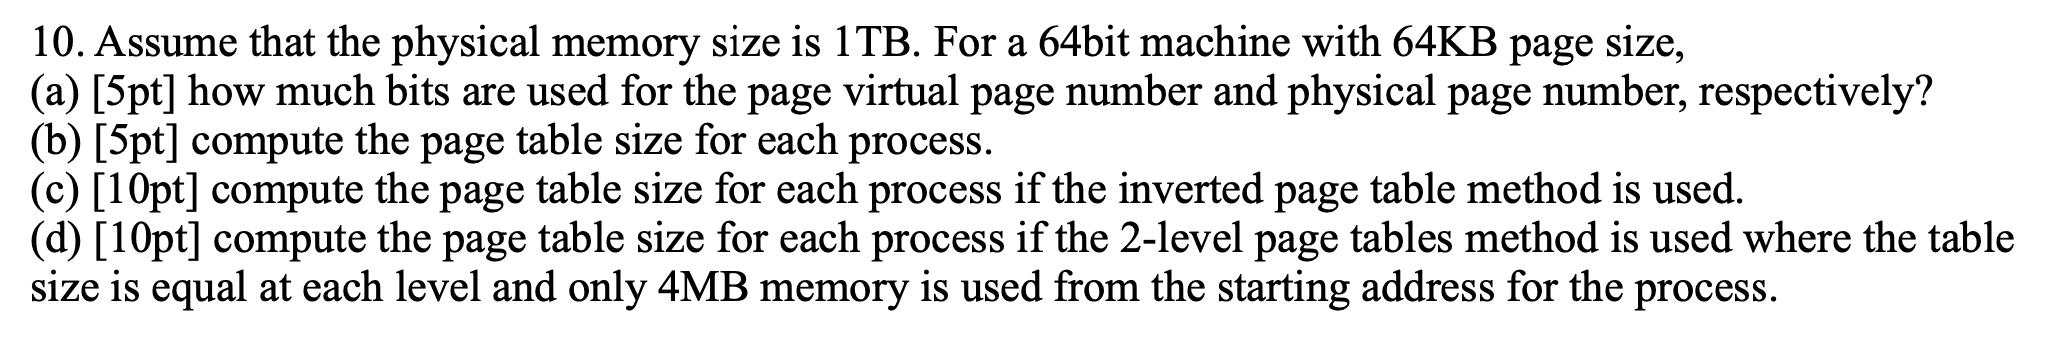 10. Assume that the physical memory size is 1TB. For a 64bit machine with 64KB page size, (a) [5pt] how much